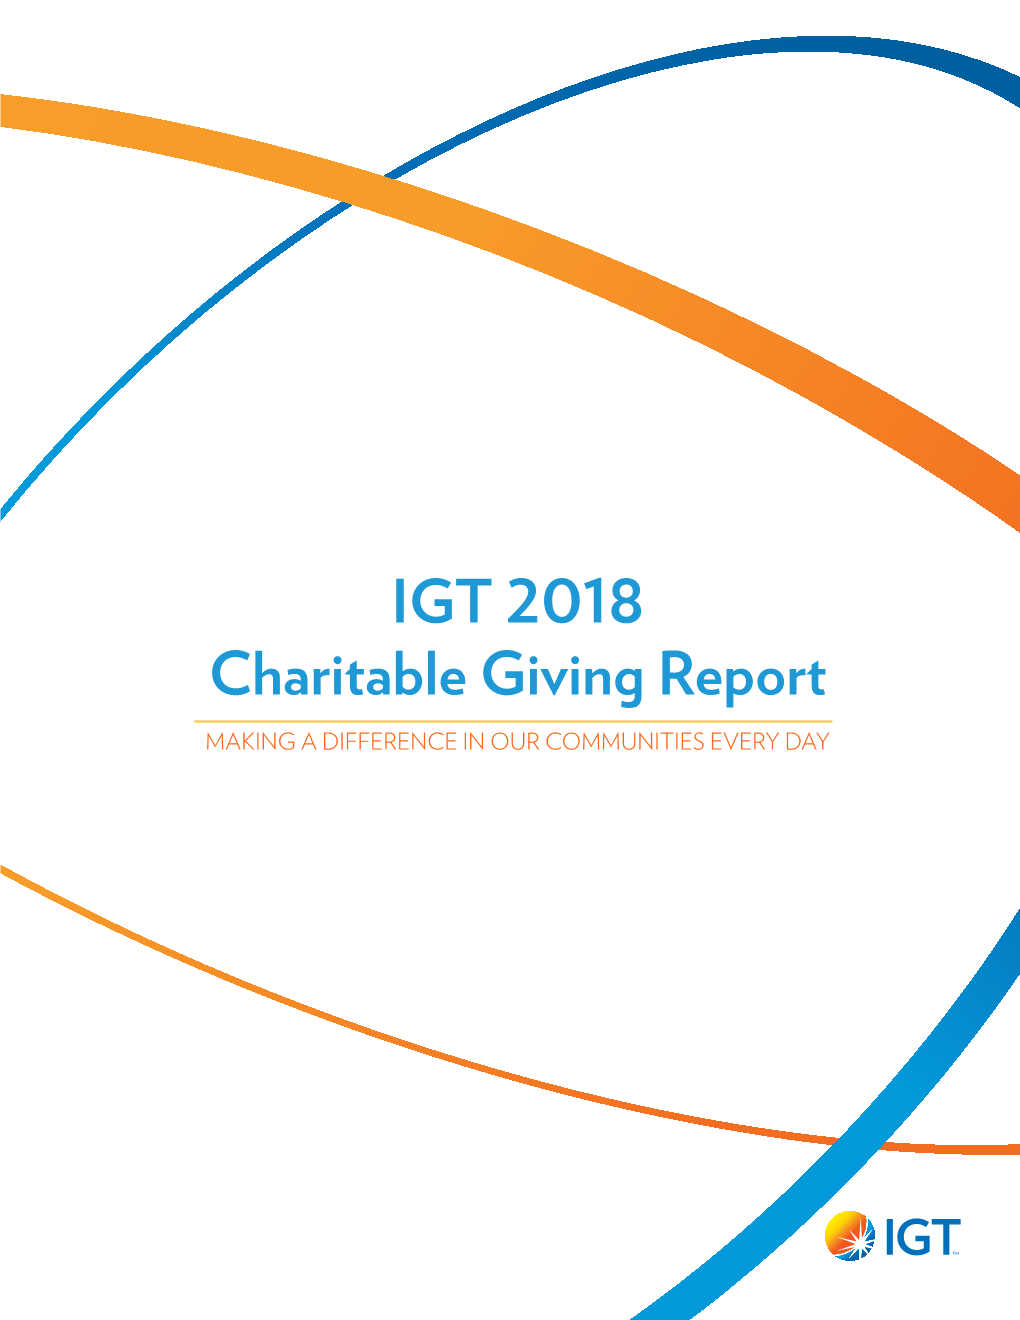 IGT 2018 Charitable Giving Report